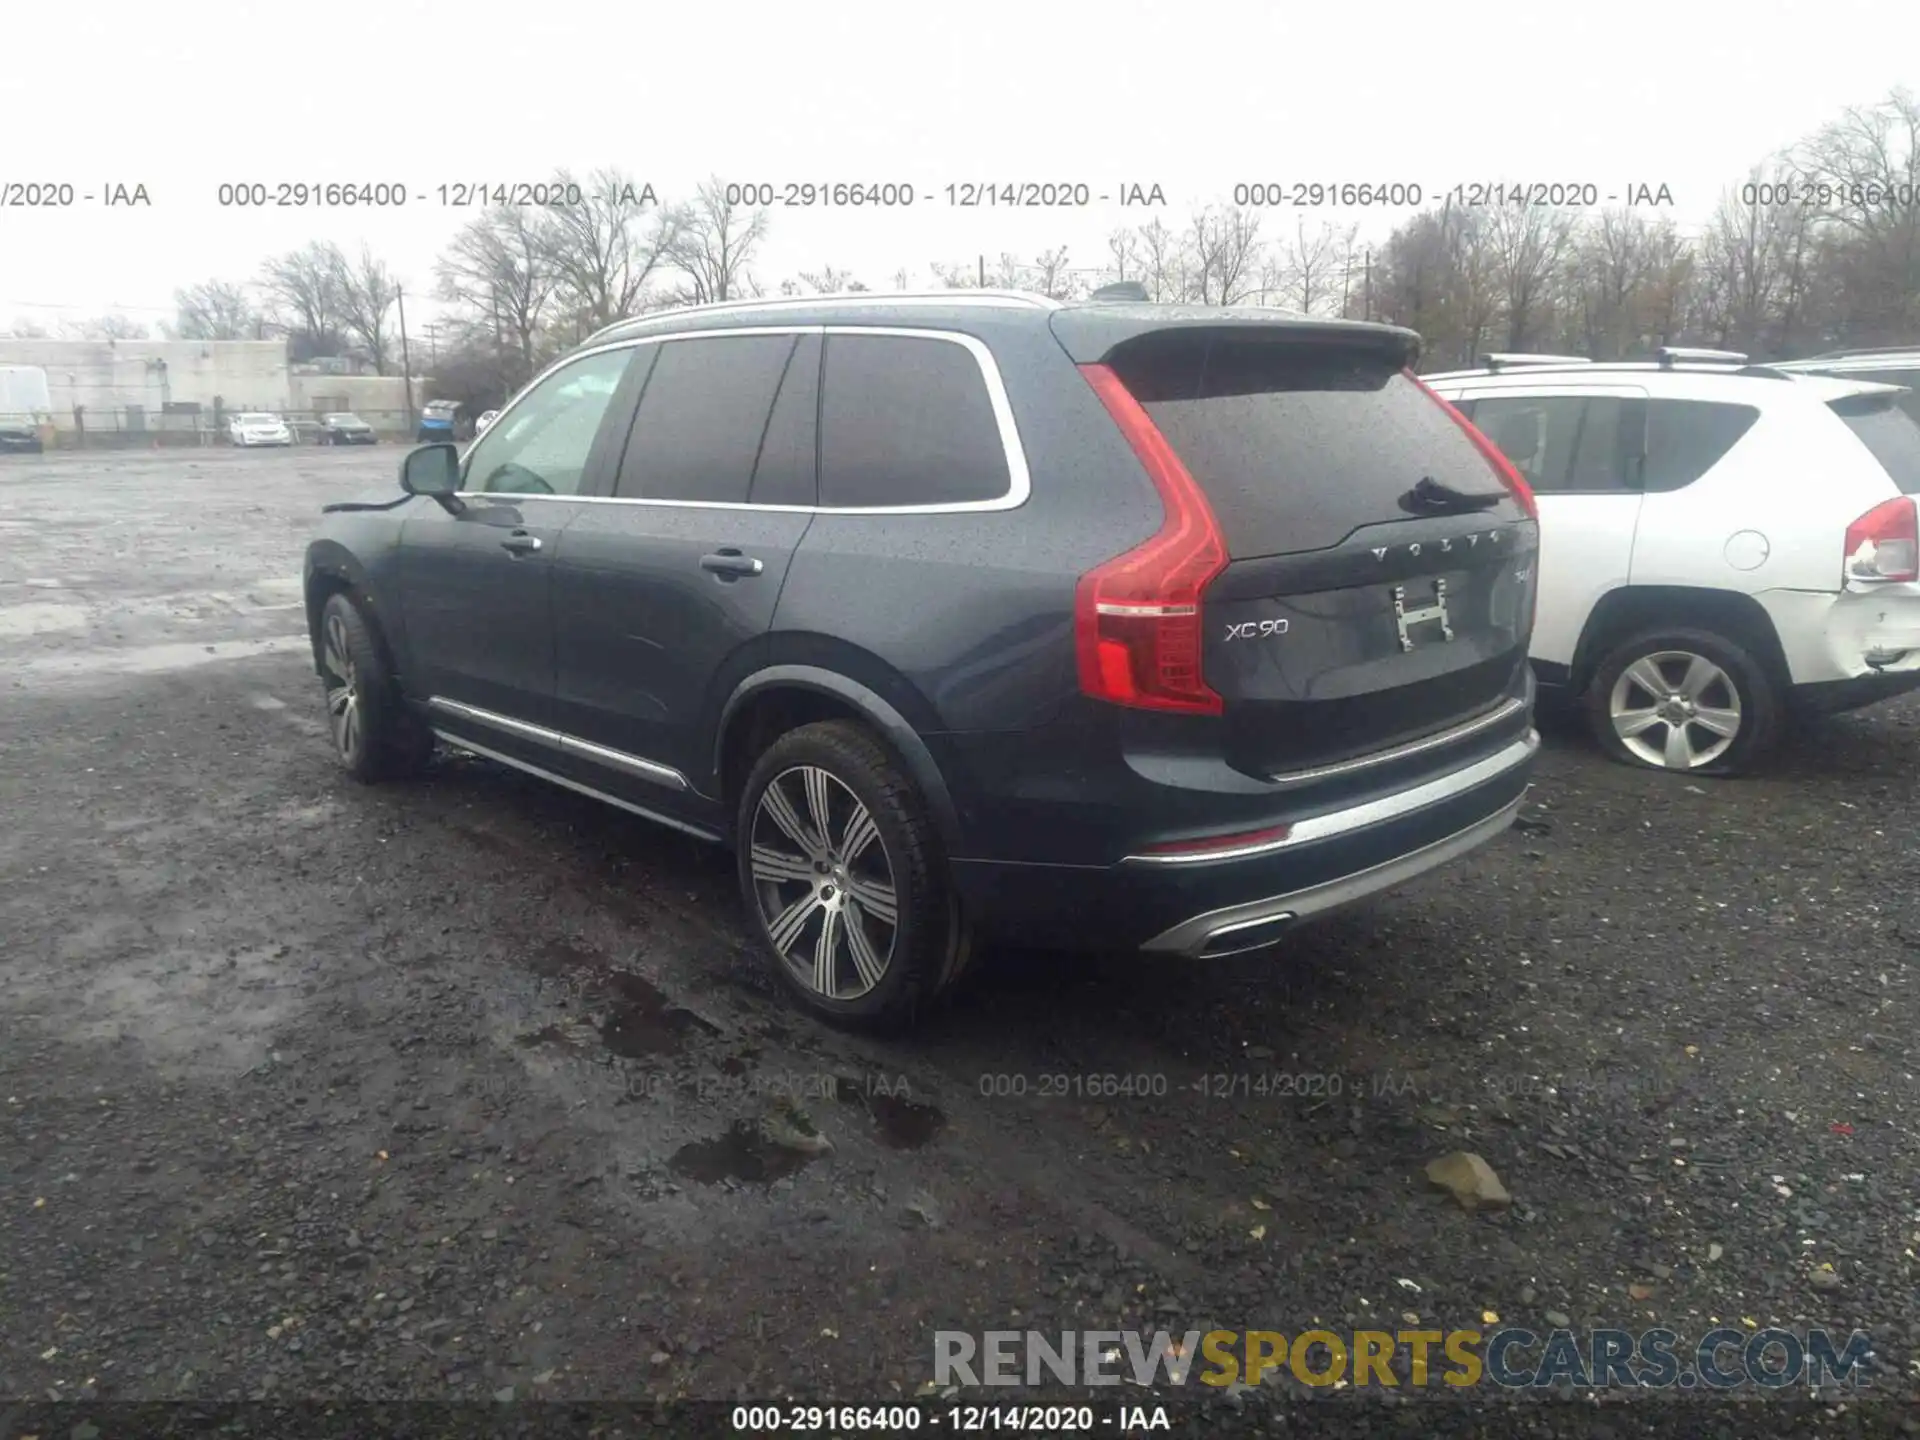 3 Photograph of a damaged car YV4A22PLXL1604144 VOLVO XC90 2020